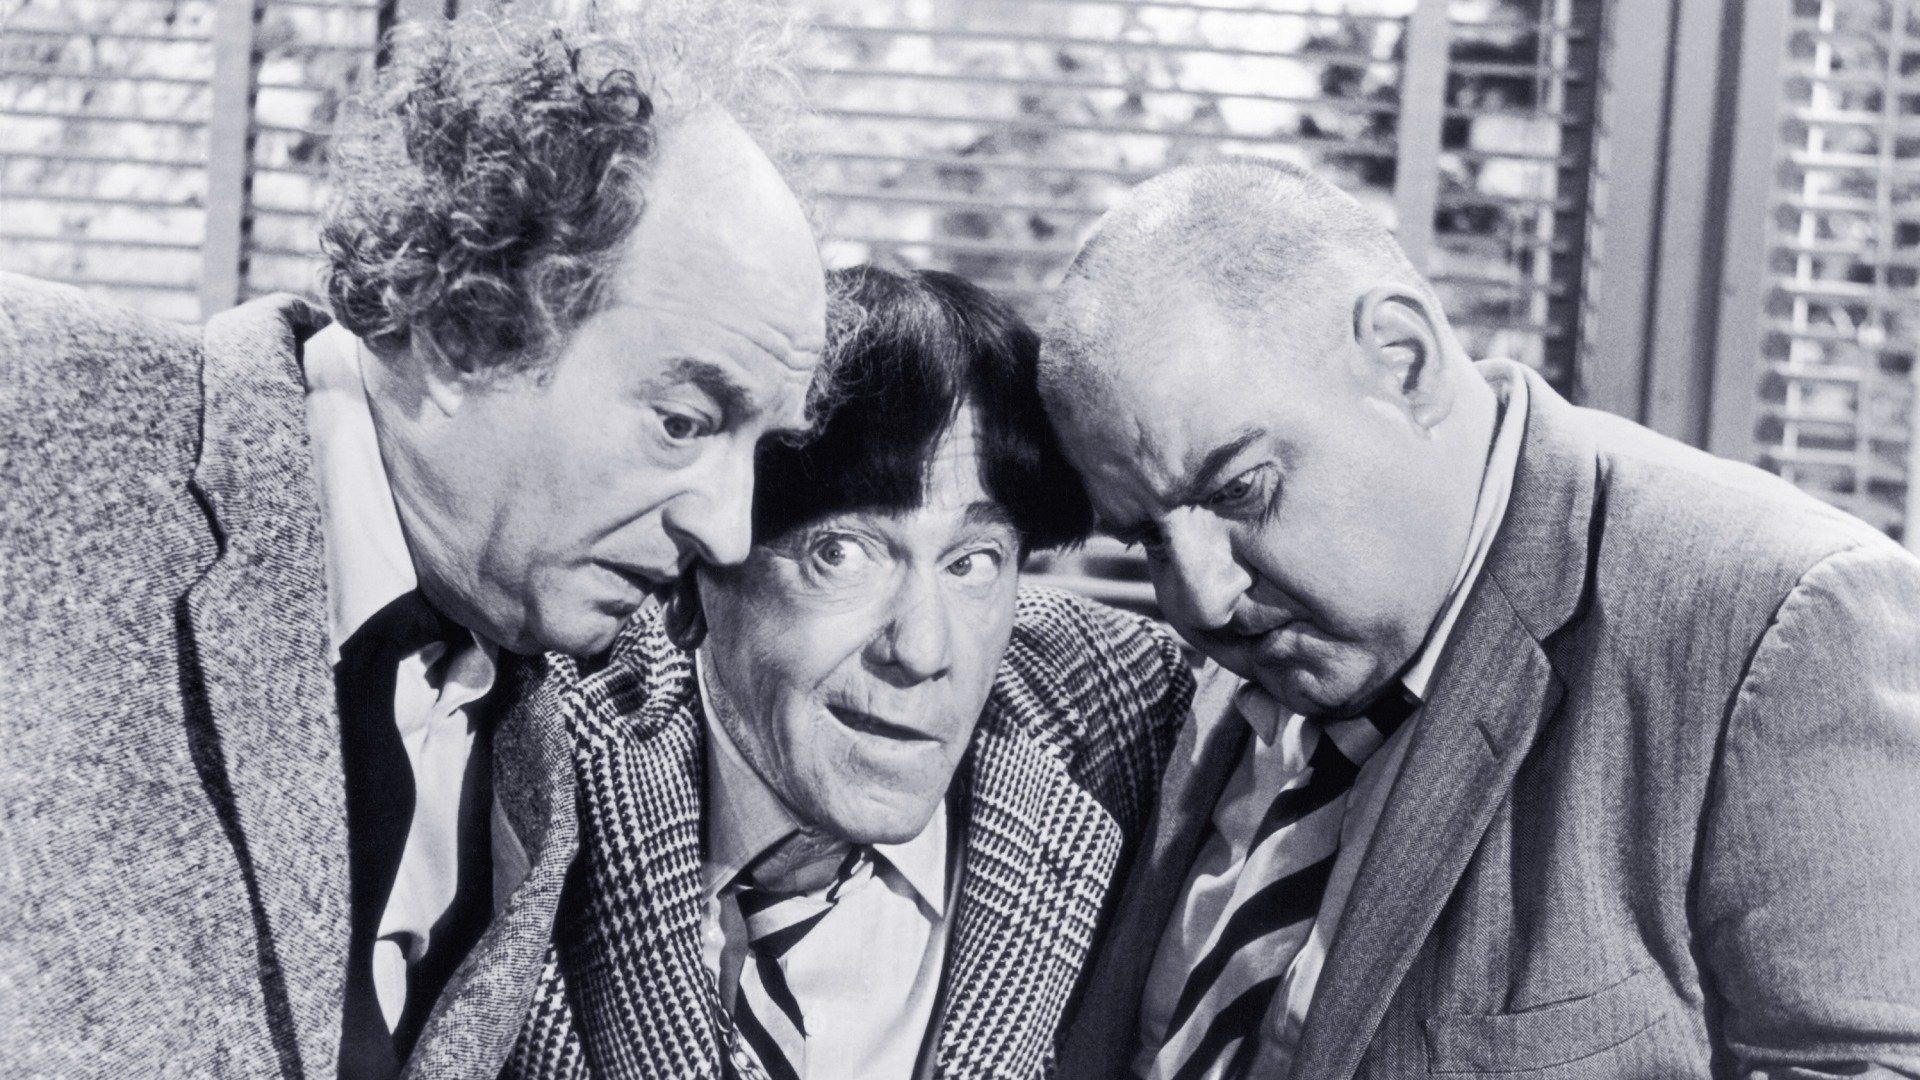 The Three Stooges Go Around the World in a Daze Backdrop